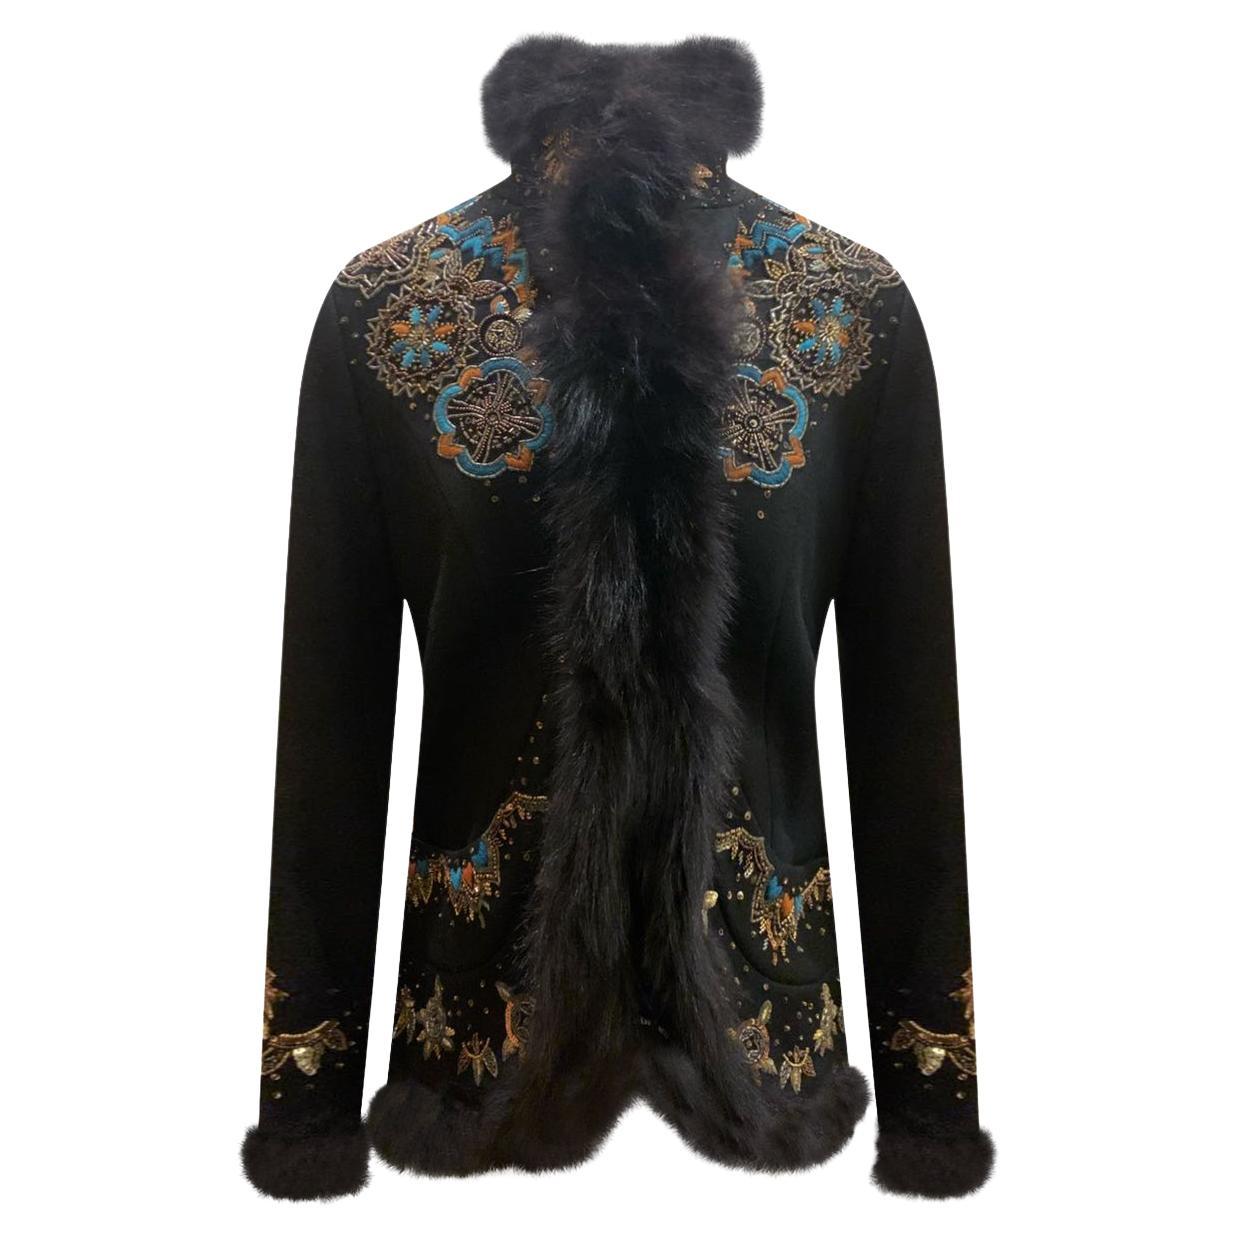 NICOLE MILLER BLACK WOOL JACLET with FOX FUR TRIM, SEQUINS and EMBROIDERY EU 42